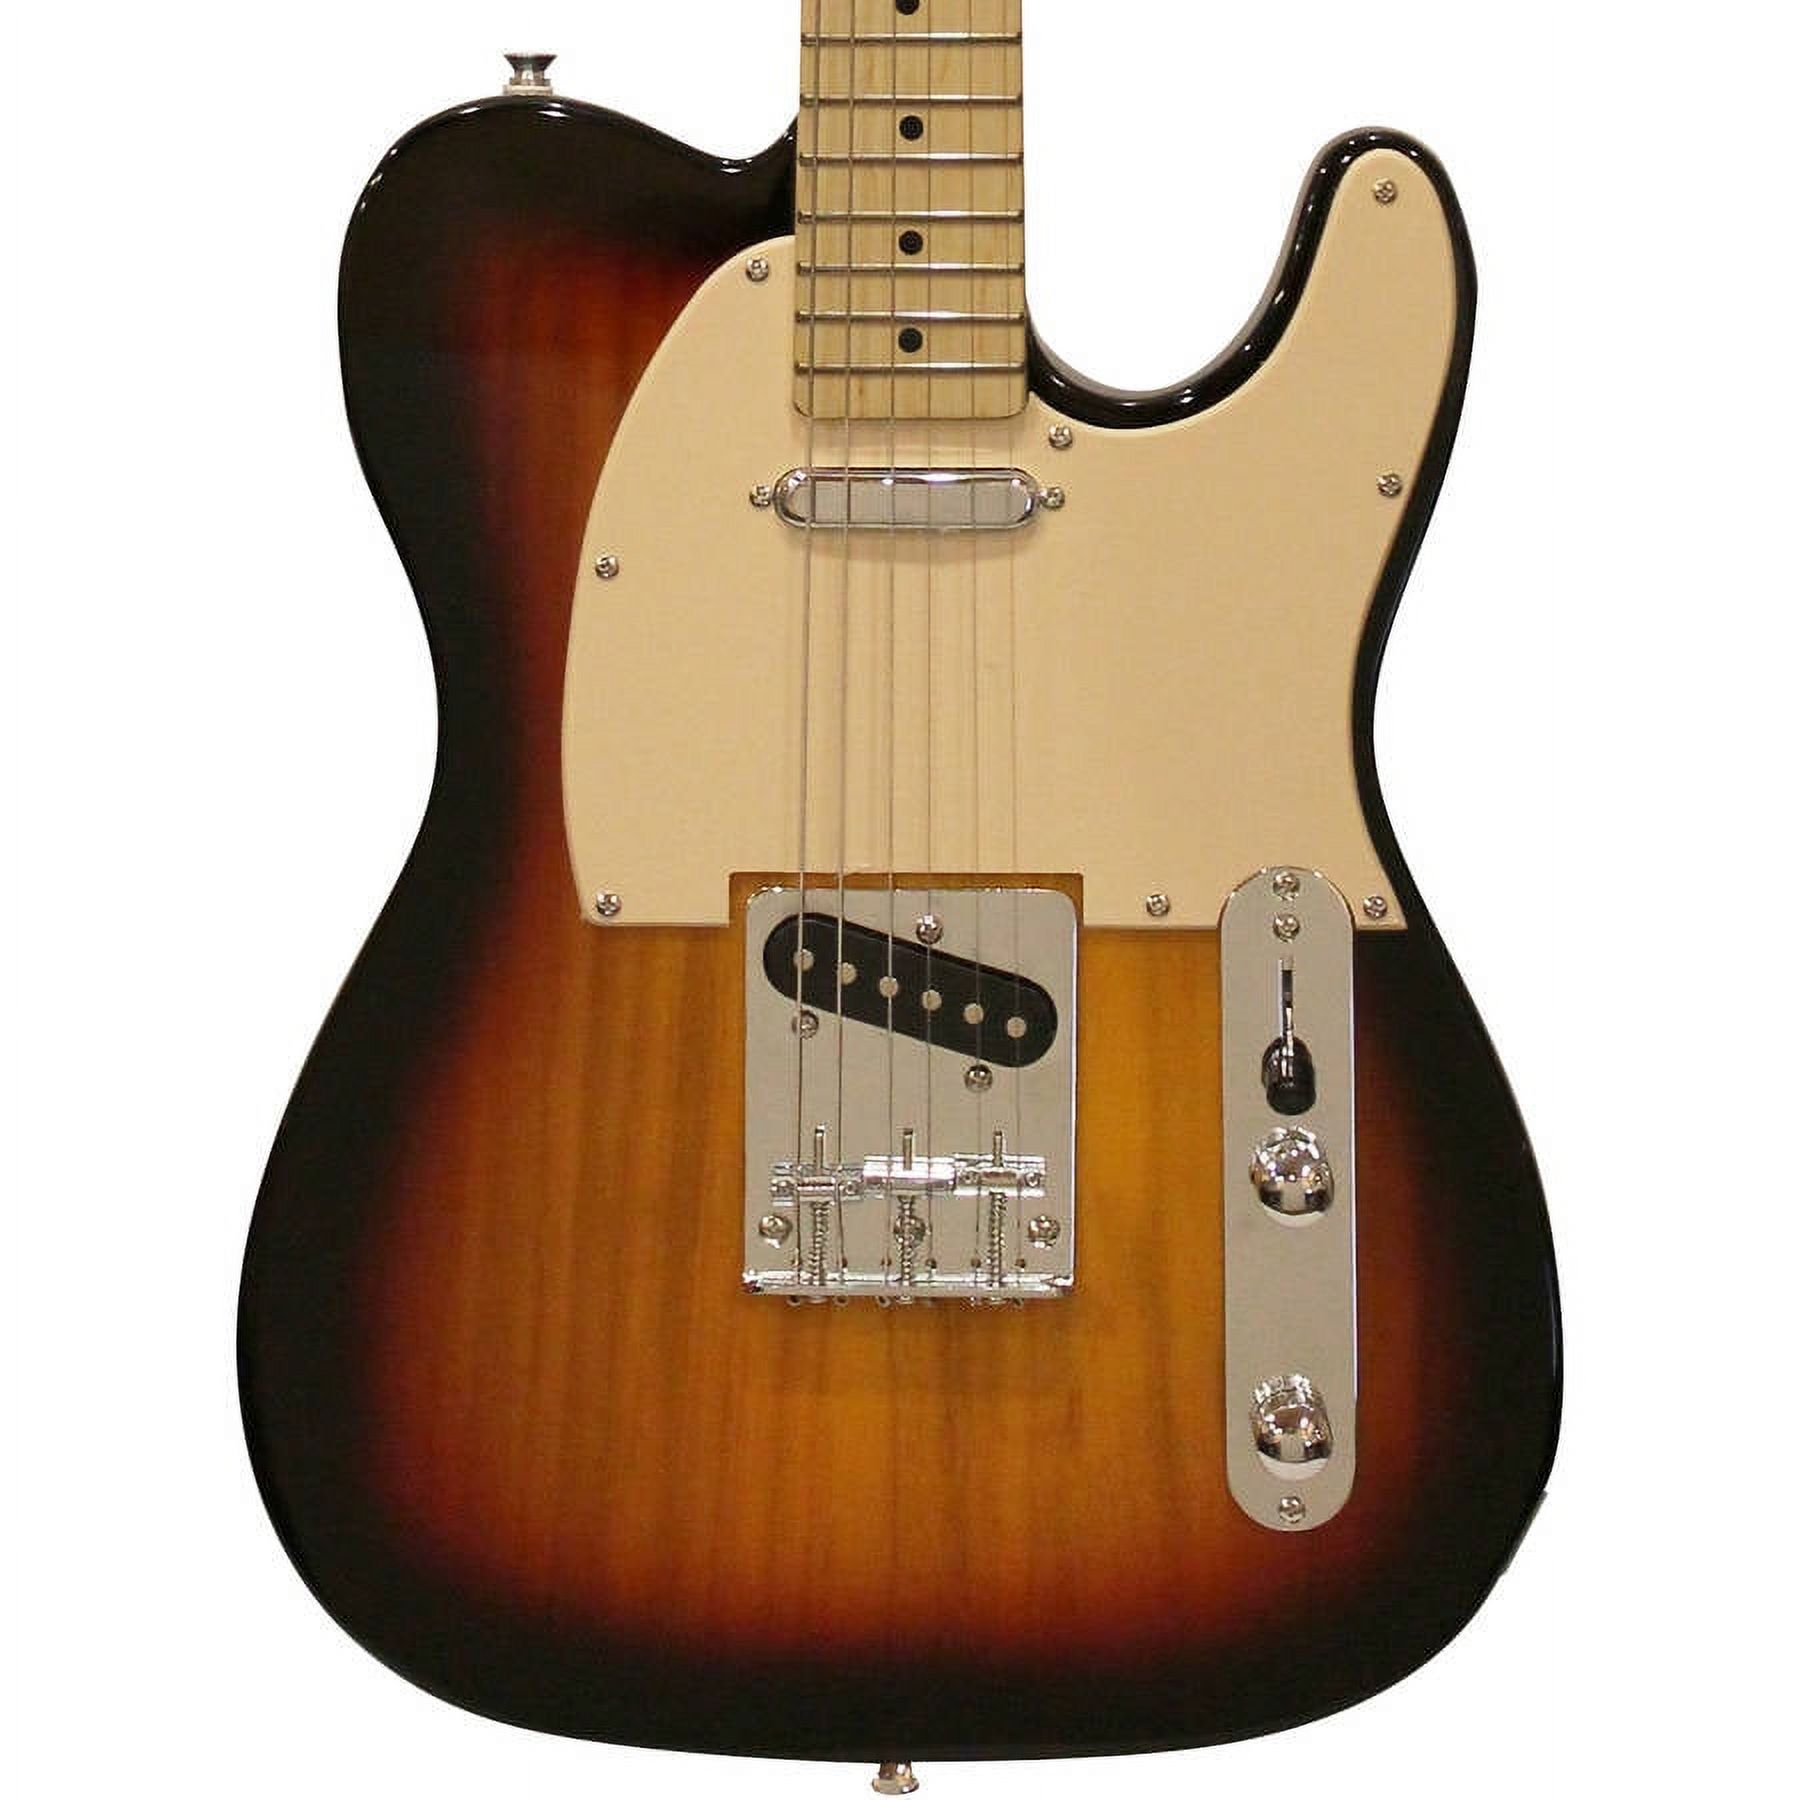 Sawtooth Sunburst ET Series Electric Guitar with Aged White Pickguard  Includes: Gig Bag, Amp, Picks, Tuner, Strap, Stand, Cable, and Guitar  Instructional